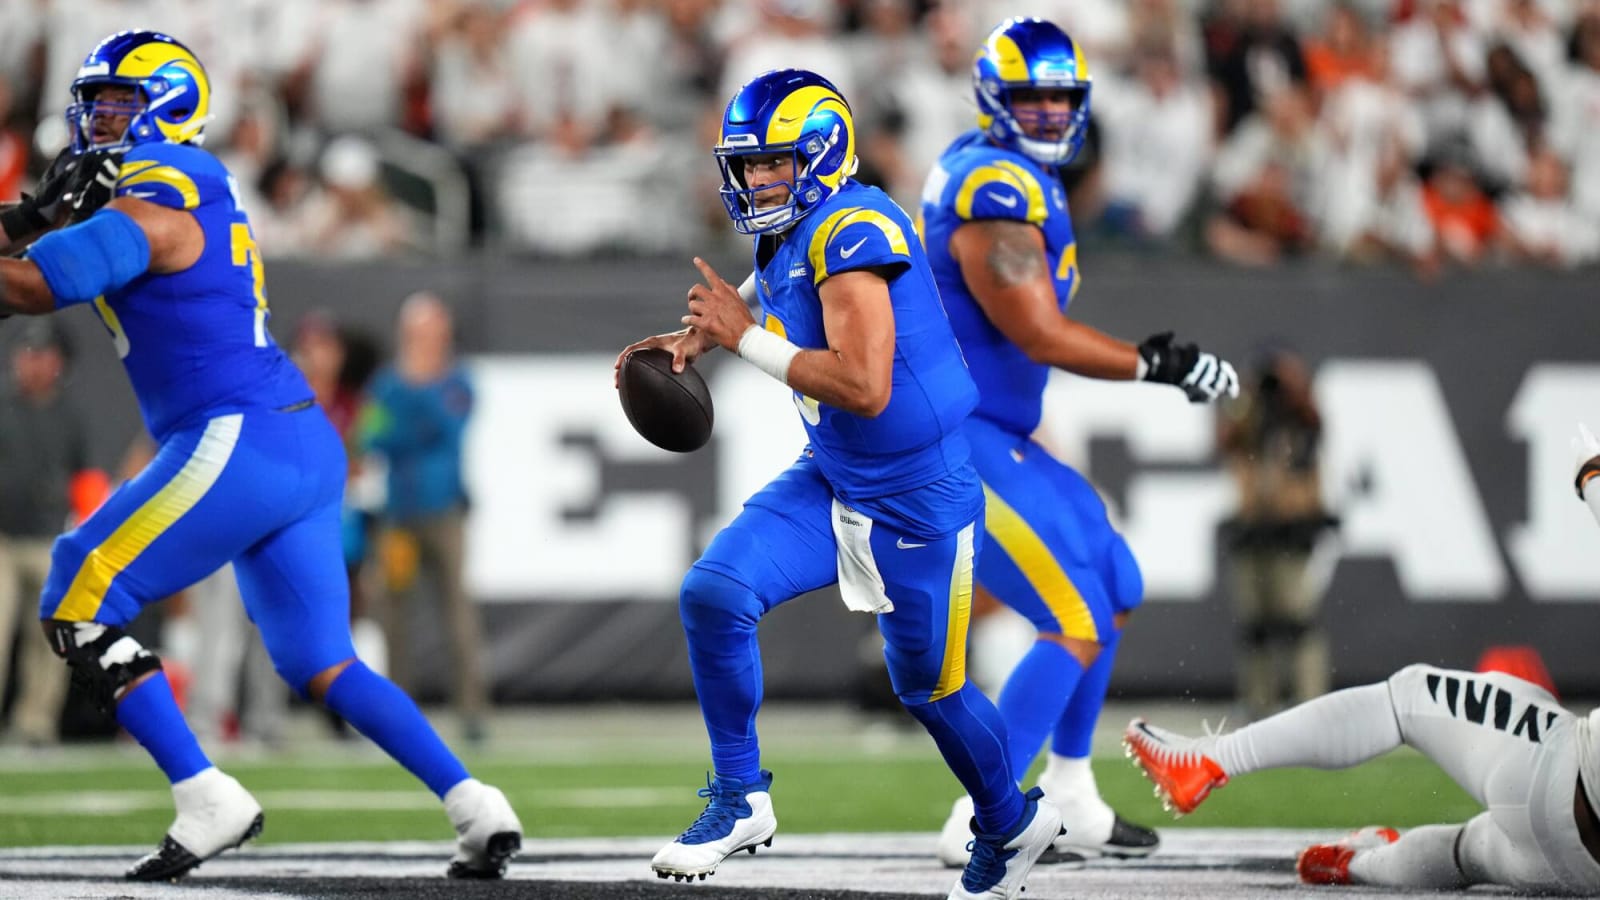 Highlights & Takeaways From Rams’ Week 3 Loss To Bengals